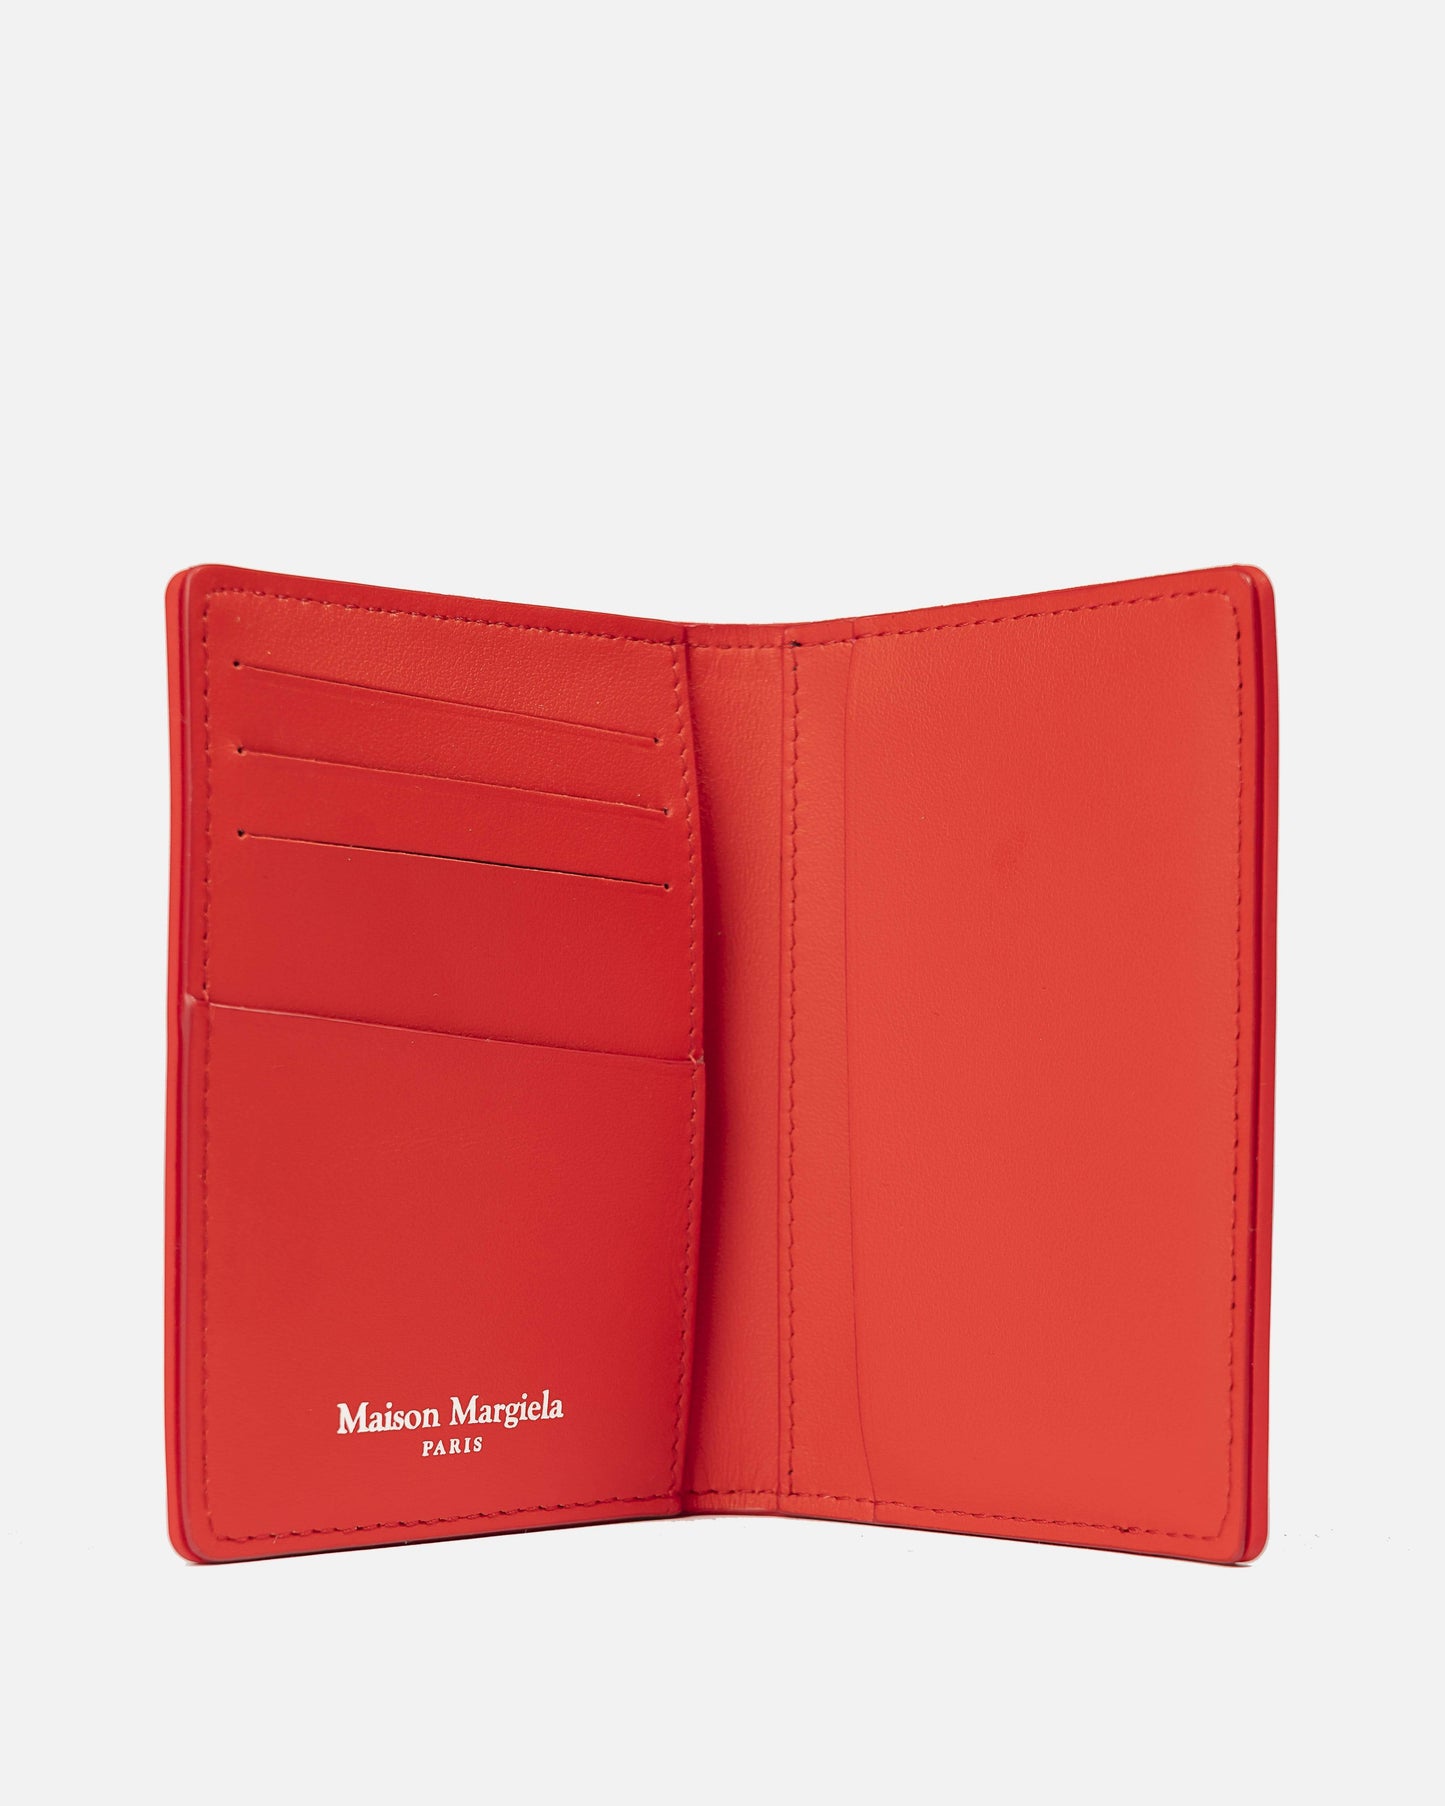 Maison Margiela Leather Goods Rubberized Fold Card Holder in Red